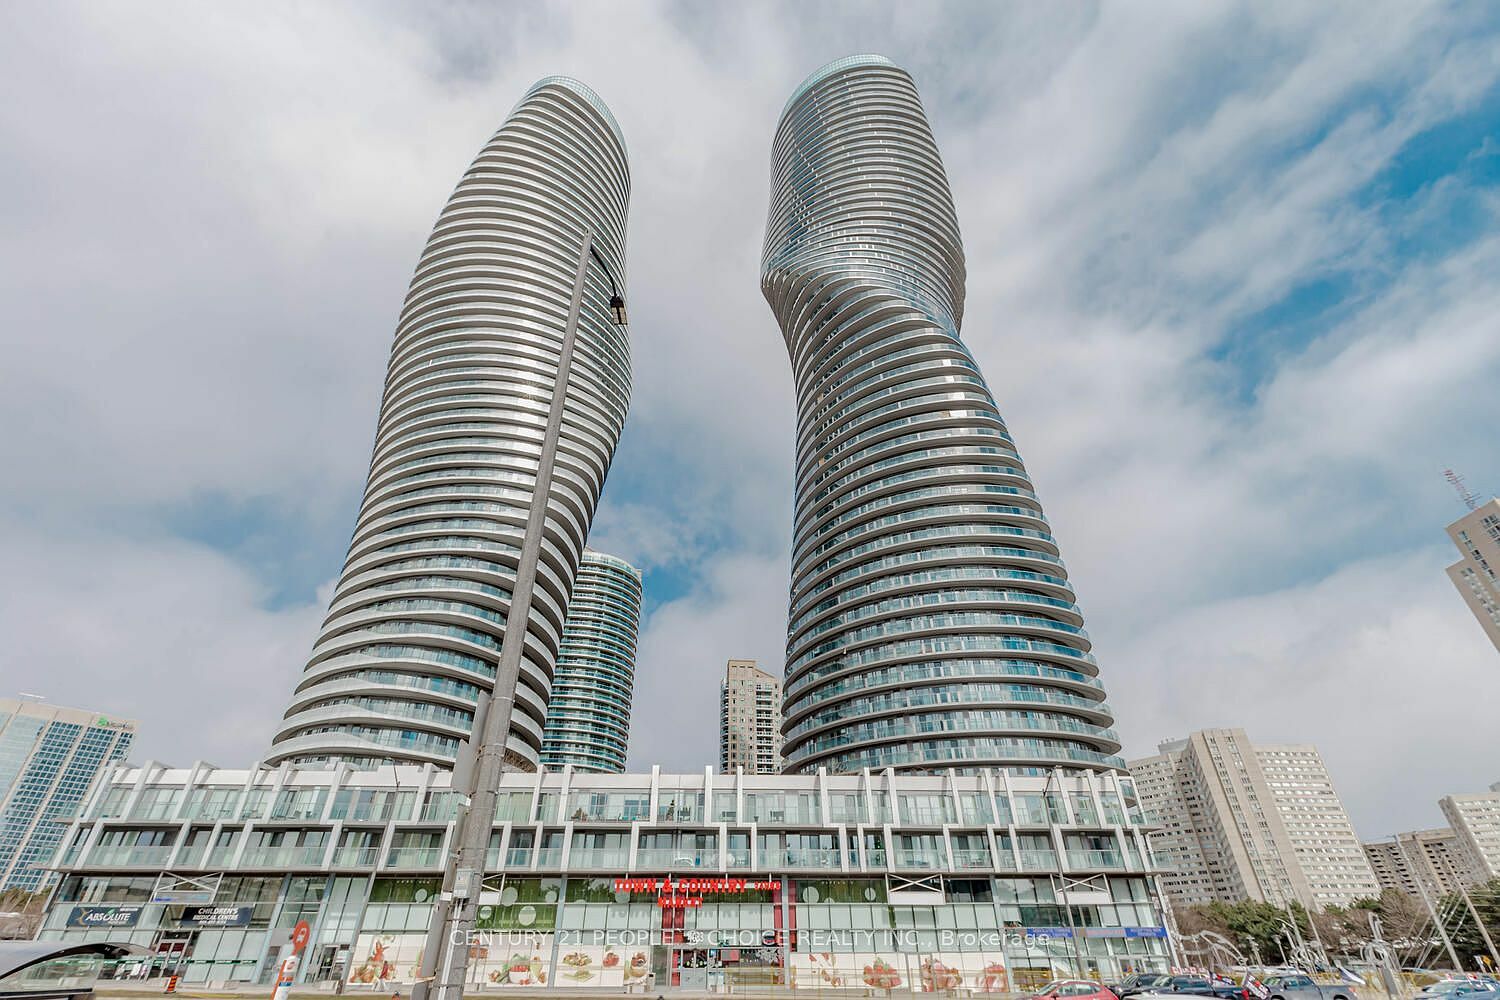 60 Absolute Ave PENTHOUSE 5502, Mississauga, ON L4Z 0A9 | Zillow